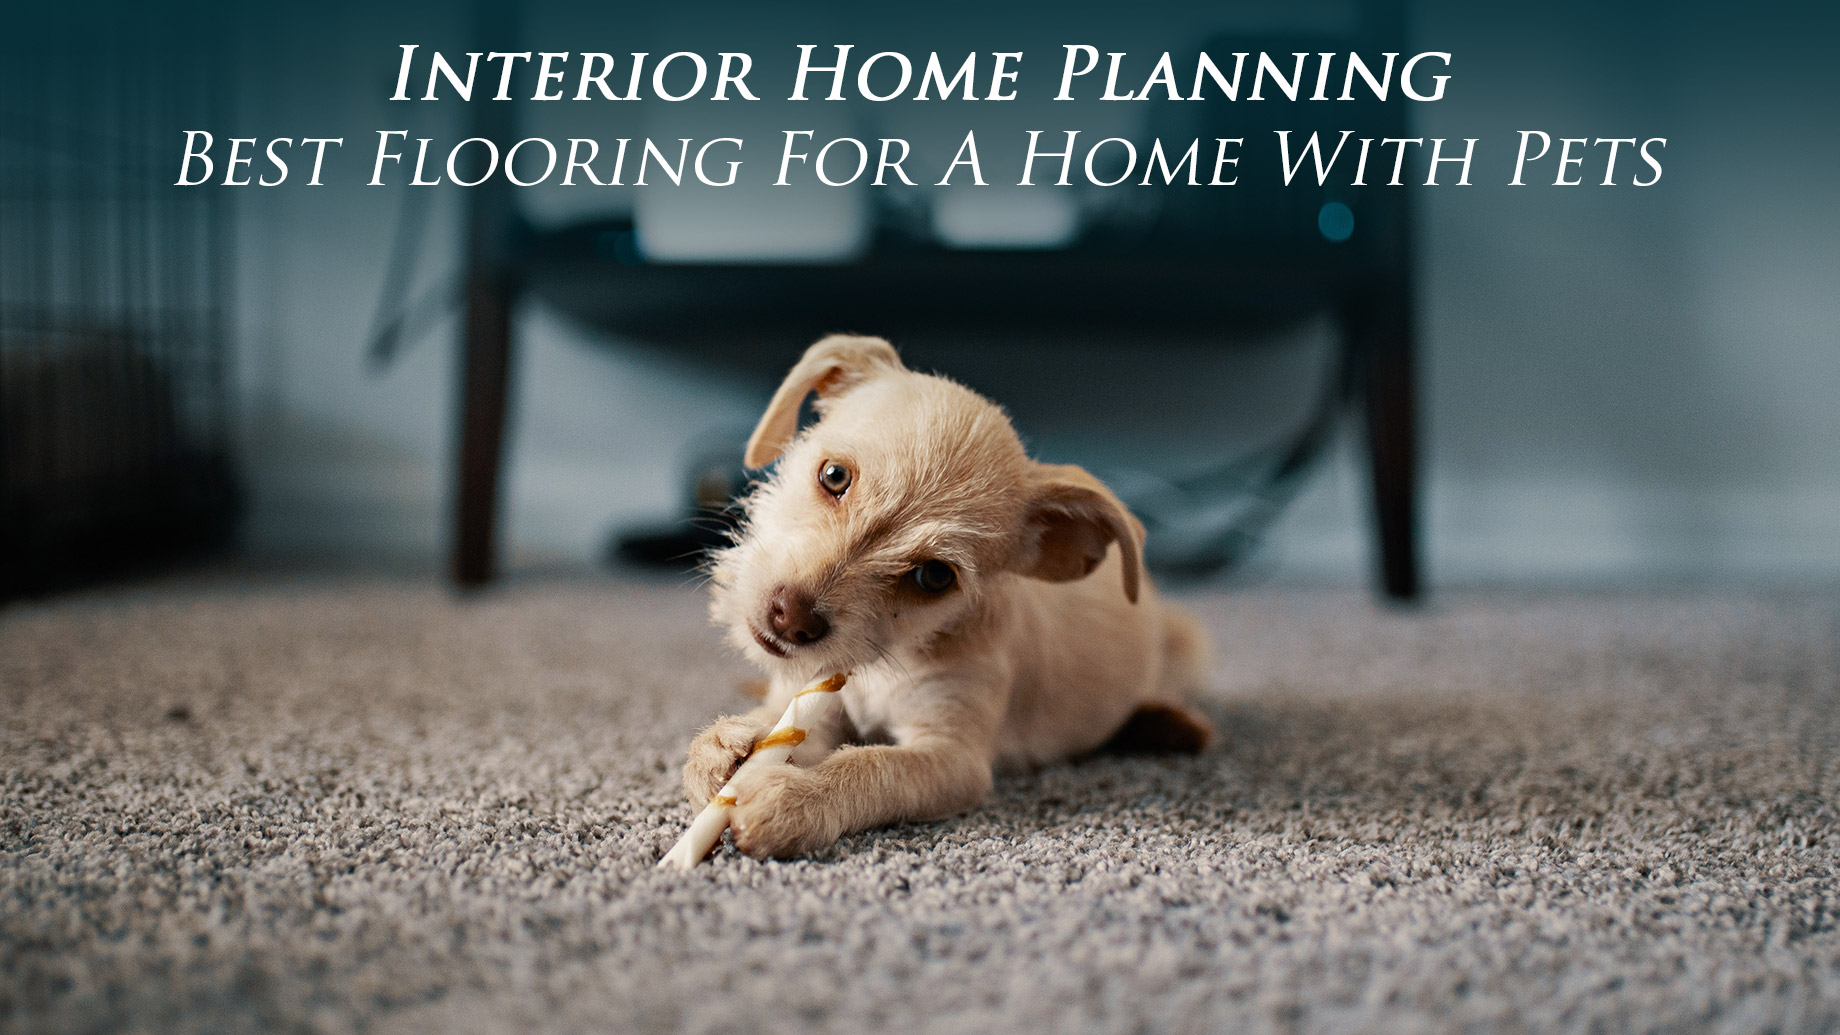 Interior Home Planning - Best Flooring For A Home With Pets